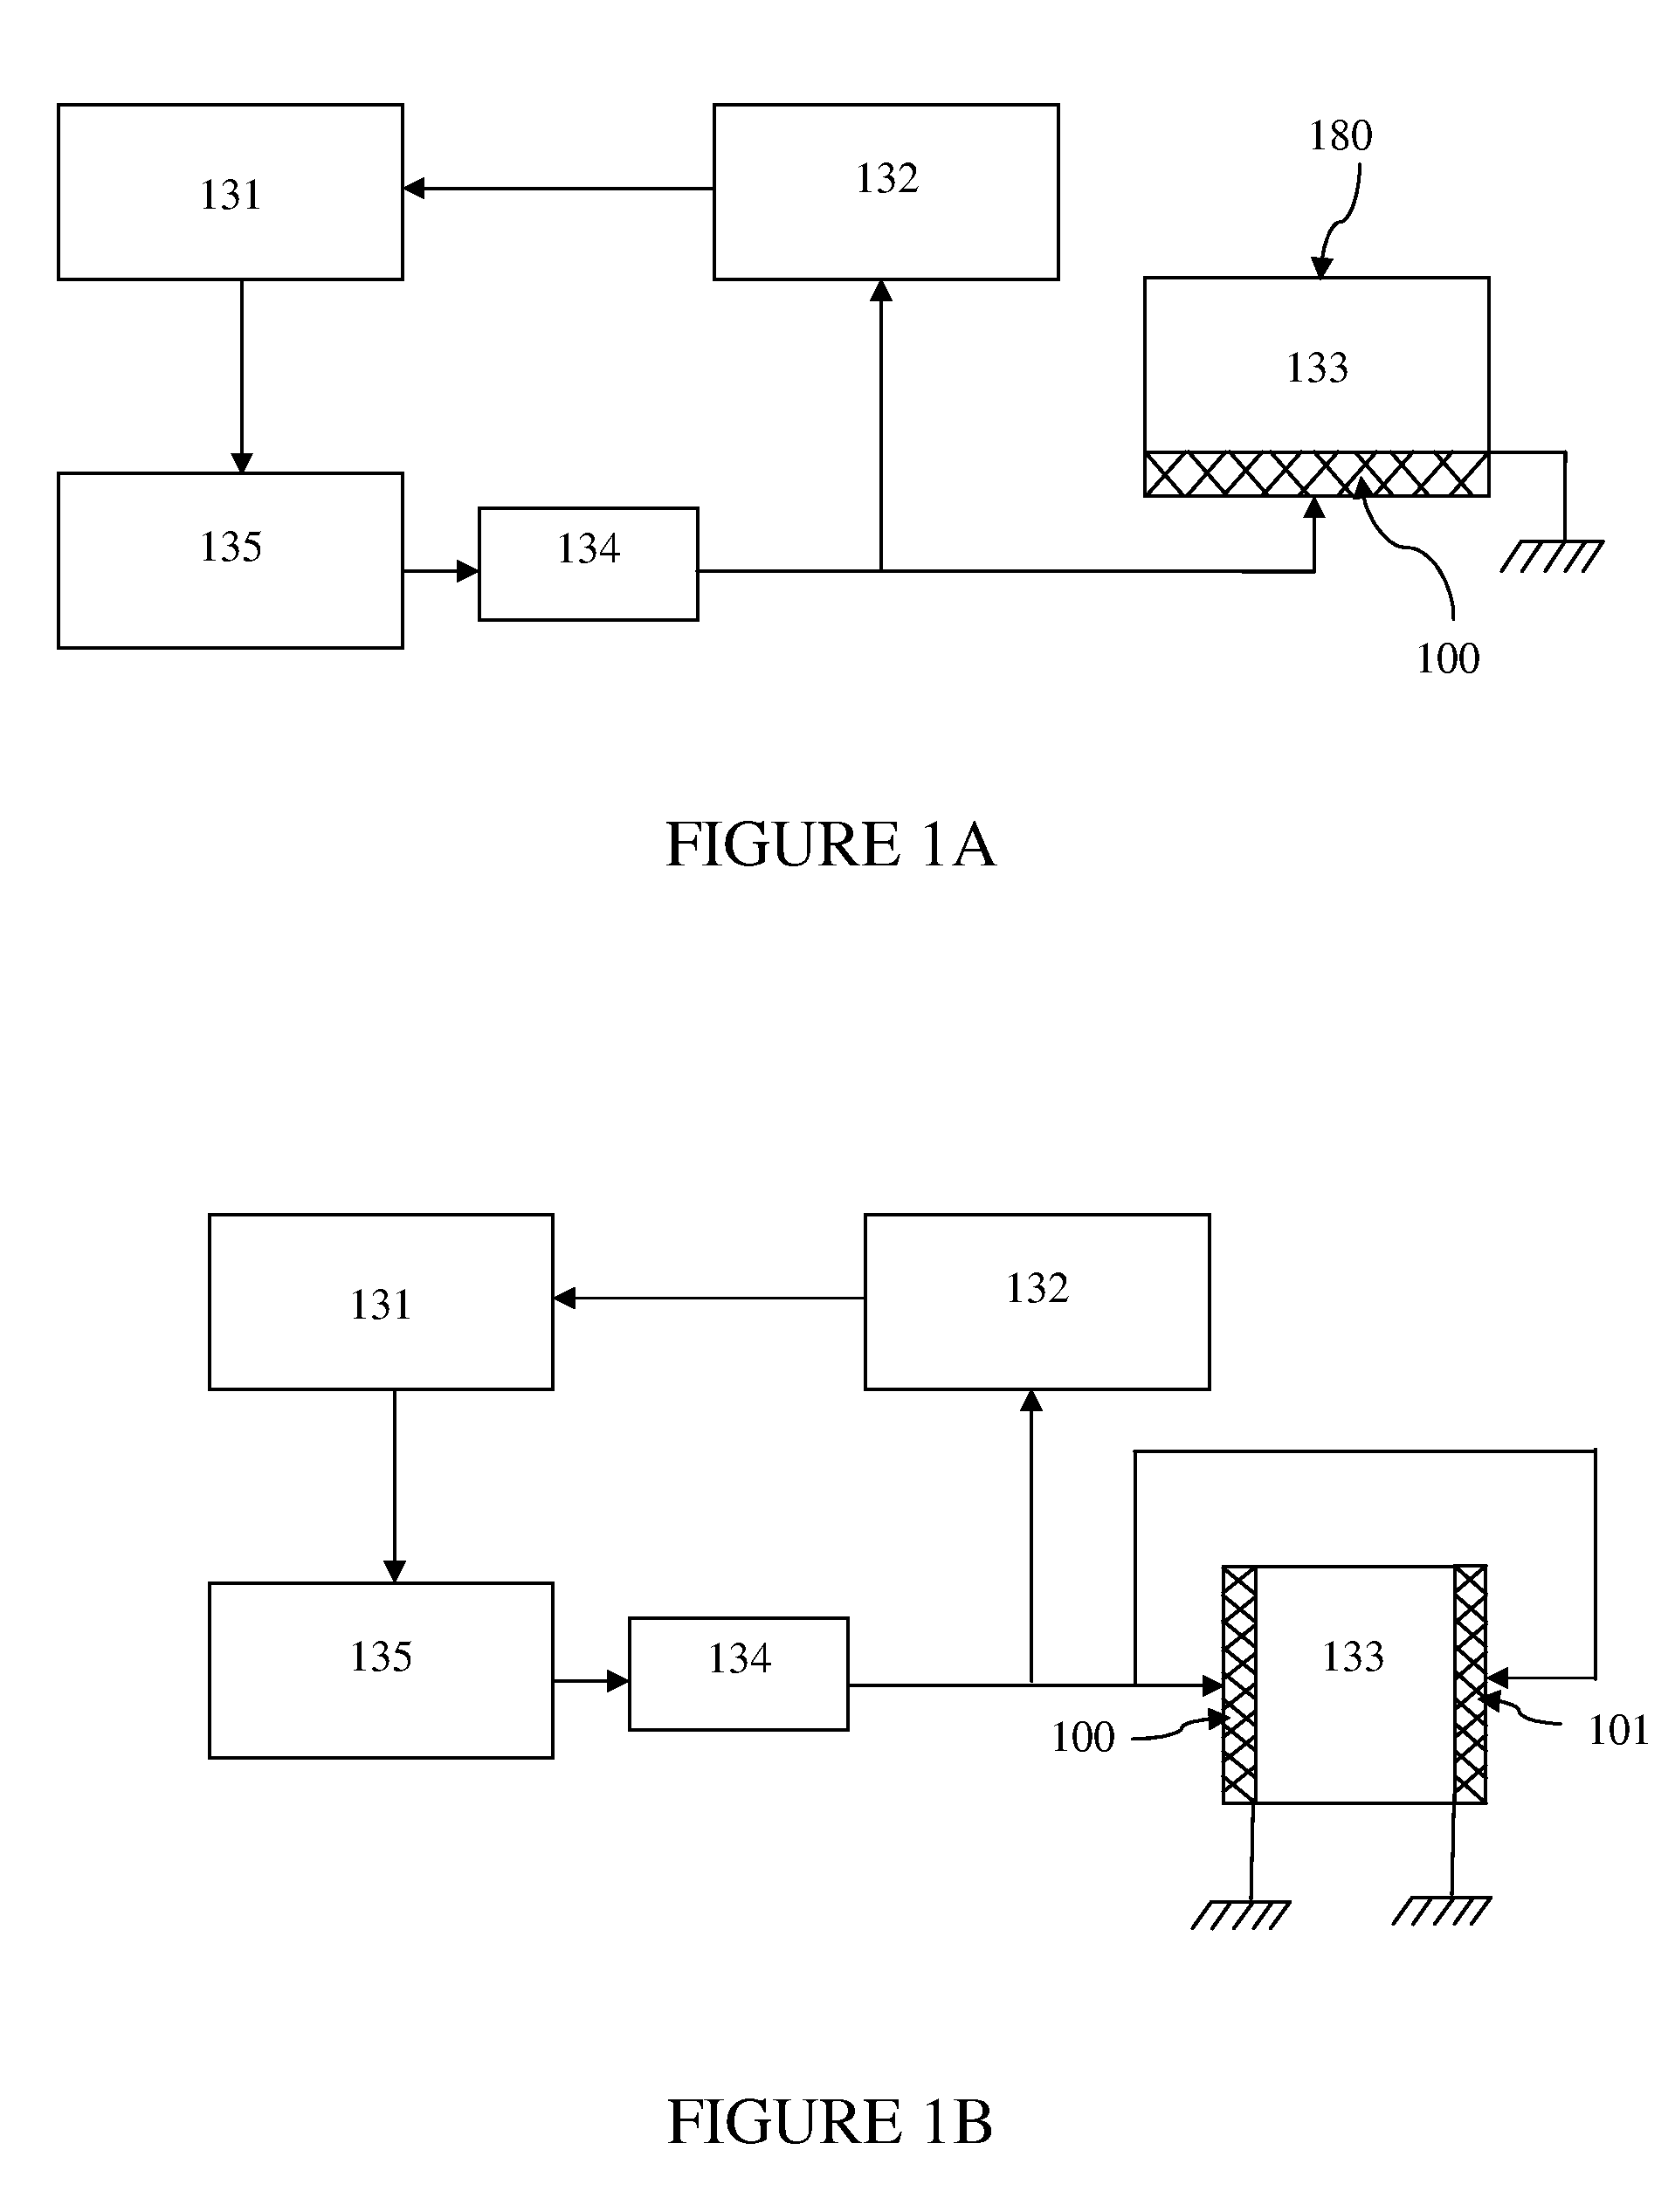 Apparatus for ultrasonic stirring of liquids in small volumes